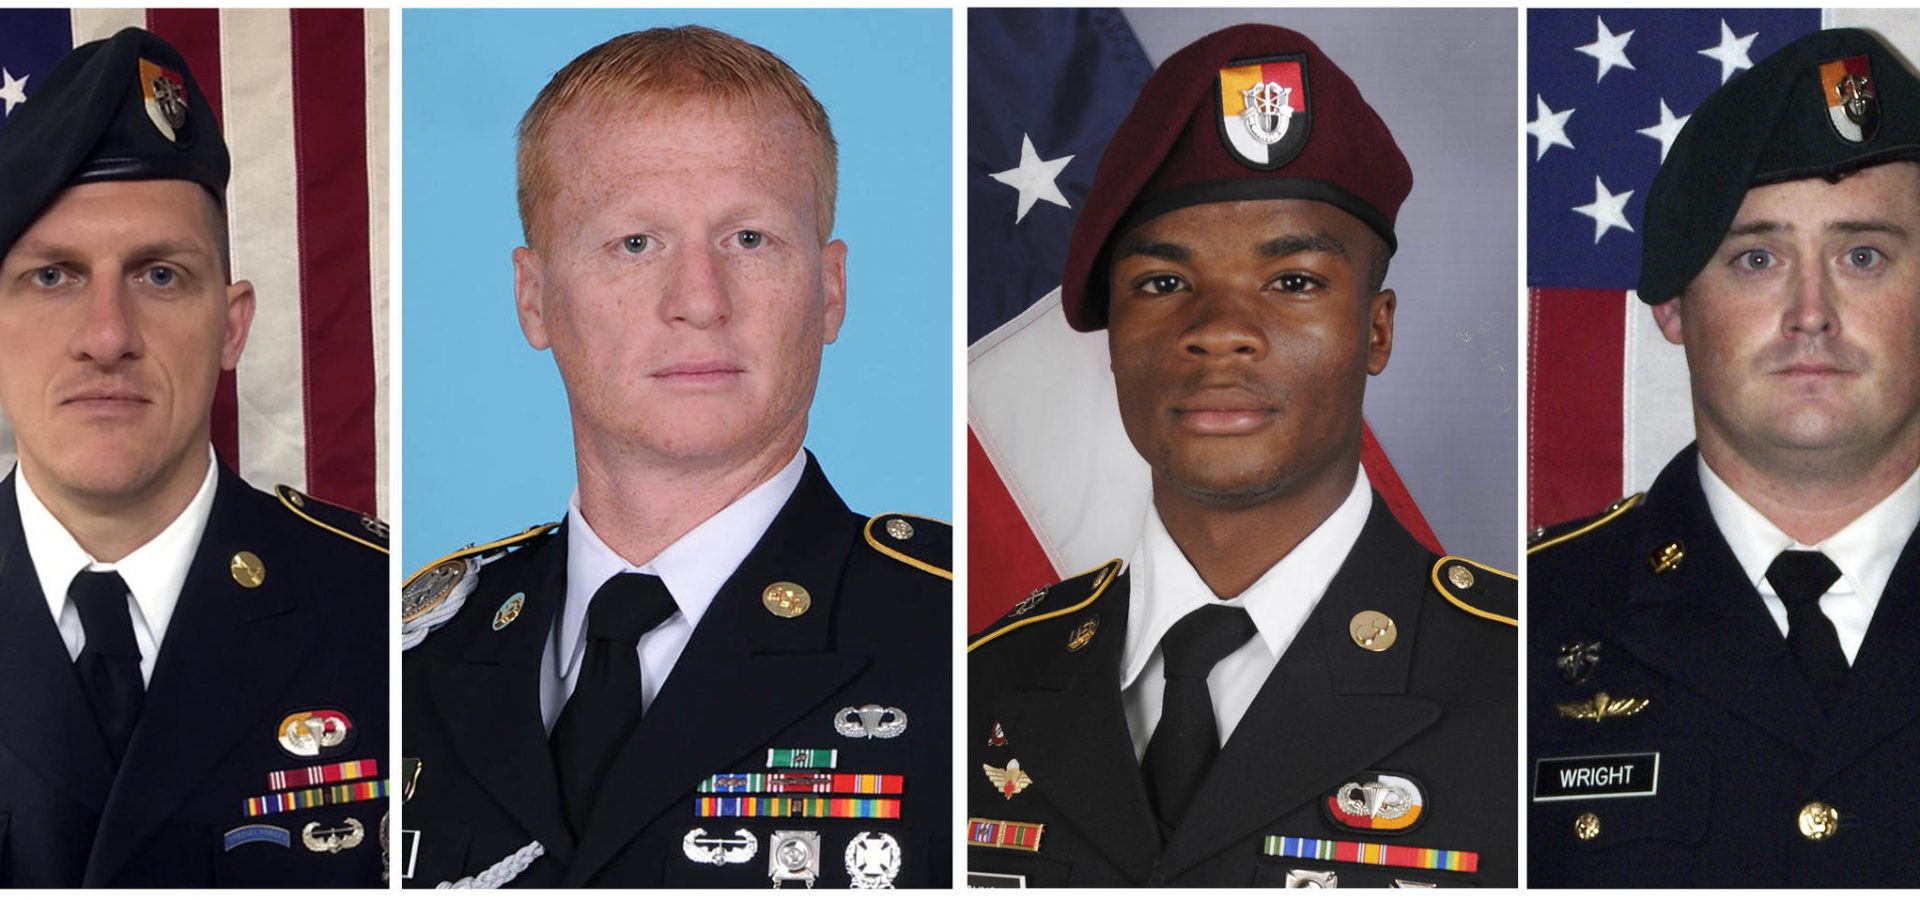 These images provided by the U.S. Army show, from left, Staff Sgt. Bryan C. Black, 35, of Puyallup, Wash.; Staff Sgt. Jeremiah W. Johnson, 39, of Springboro, Ohio; Sgt. La David Johnson of Miami Gardens, Fla.; and Staff Sgt. Dustin M. Wright, 29, of Lyons, Ga. A senior U.S. defense official says the military suspects that American special forces were ambushed in Niger after someone in the village they visited told enemy fighters they were in the area. The Army Green Berets and about 30 Niger forces stopped in a village for an hour or two to get food and water after conducting an overnight reconnaissance mission. All four were killed in Niger, when a joint patrol of American and Niger forces was ambushed by militants believed linked to the Islamic State group. (U.S. Army via AP)